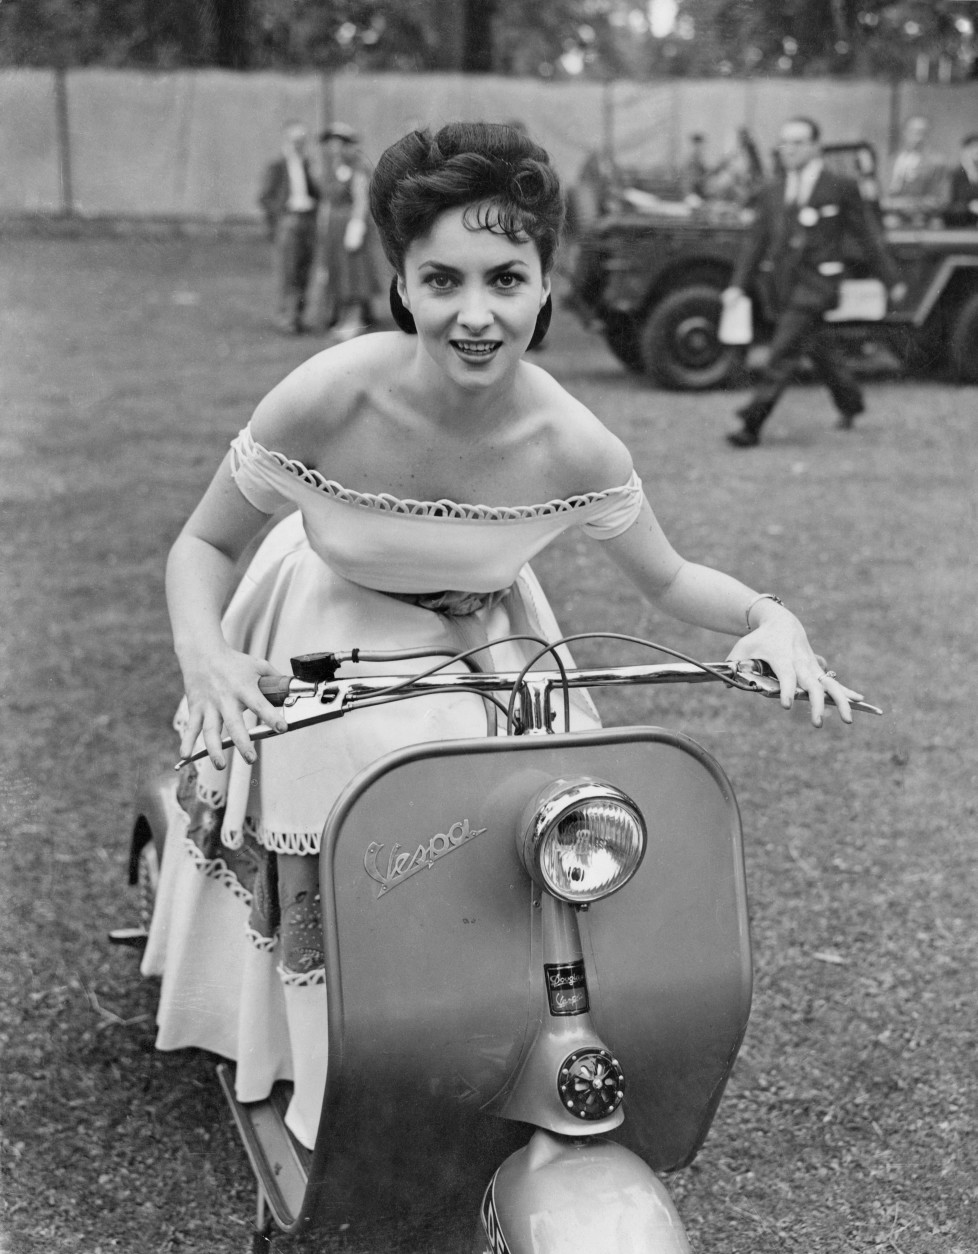 14th June 1952: Italian actress Gina Lollobrigida attends the Great Film Garden Party at Morden Hall Park in Surrey, on a Vespa motor scooter. She is in Britain to promote an Italian Film Festival. (Photo by Ron Case/Keystone/Getty Images)